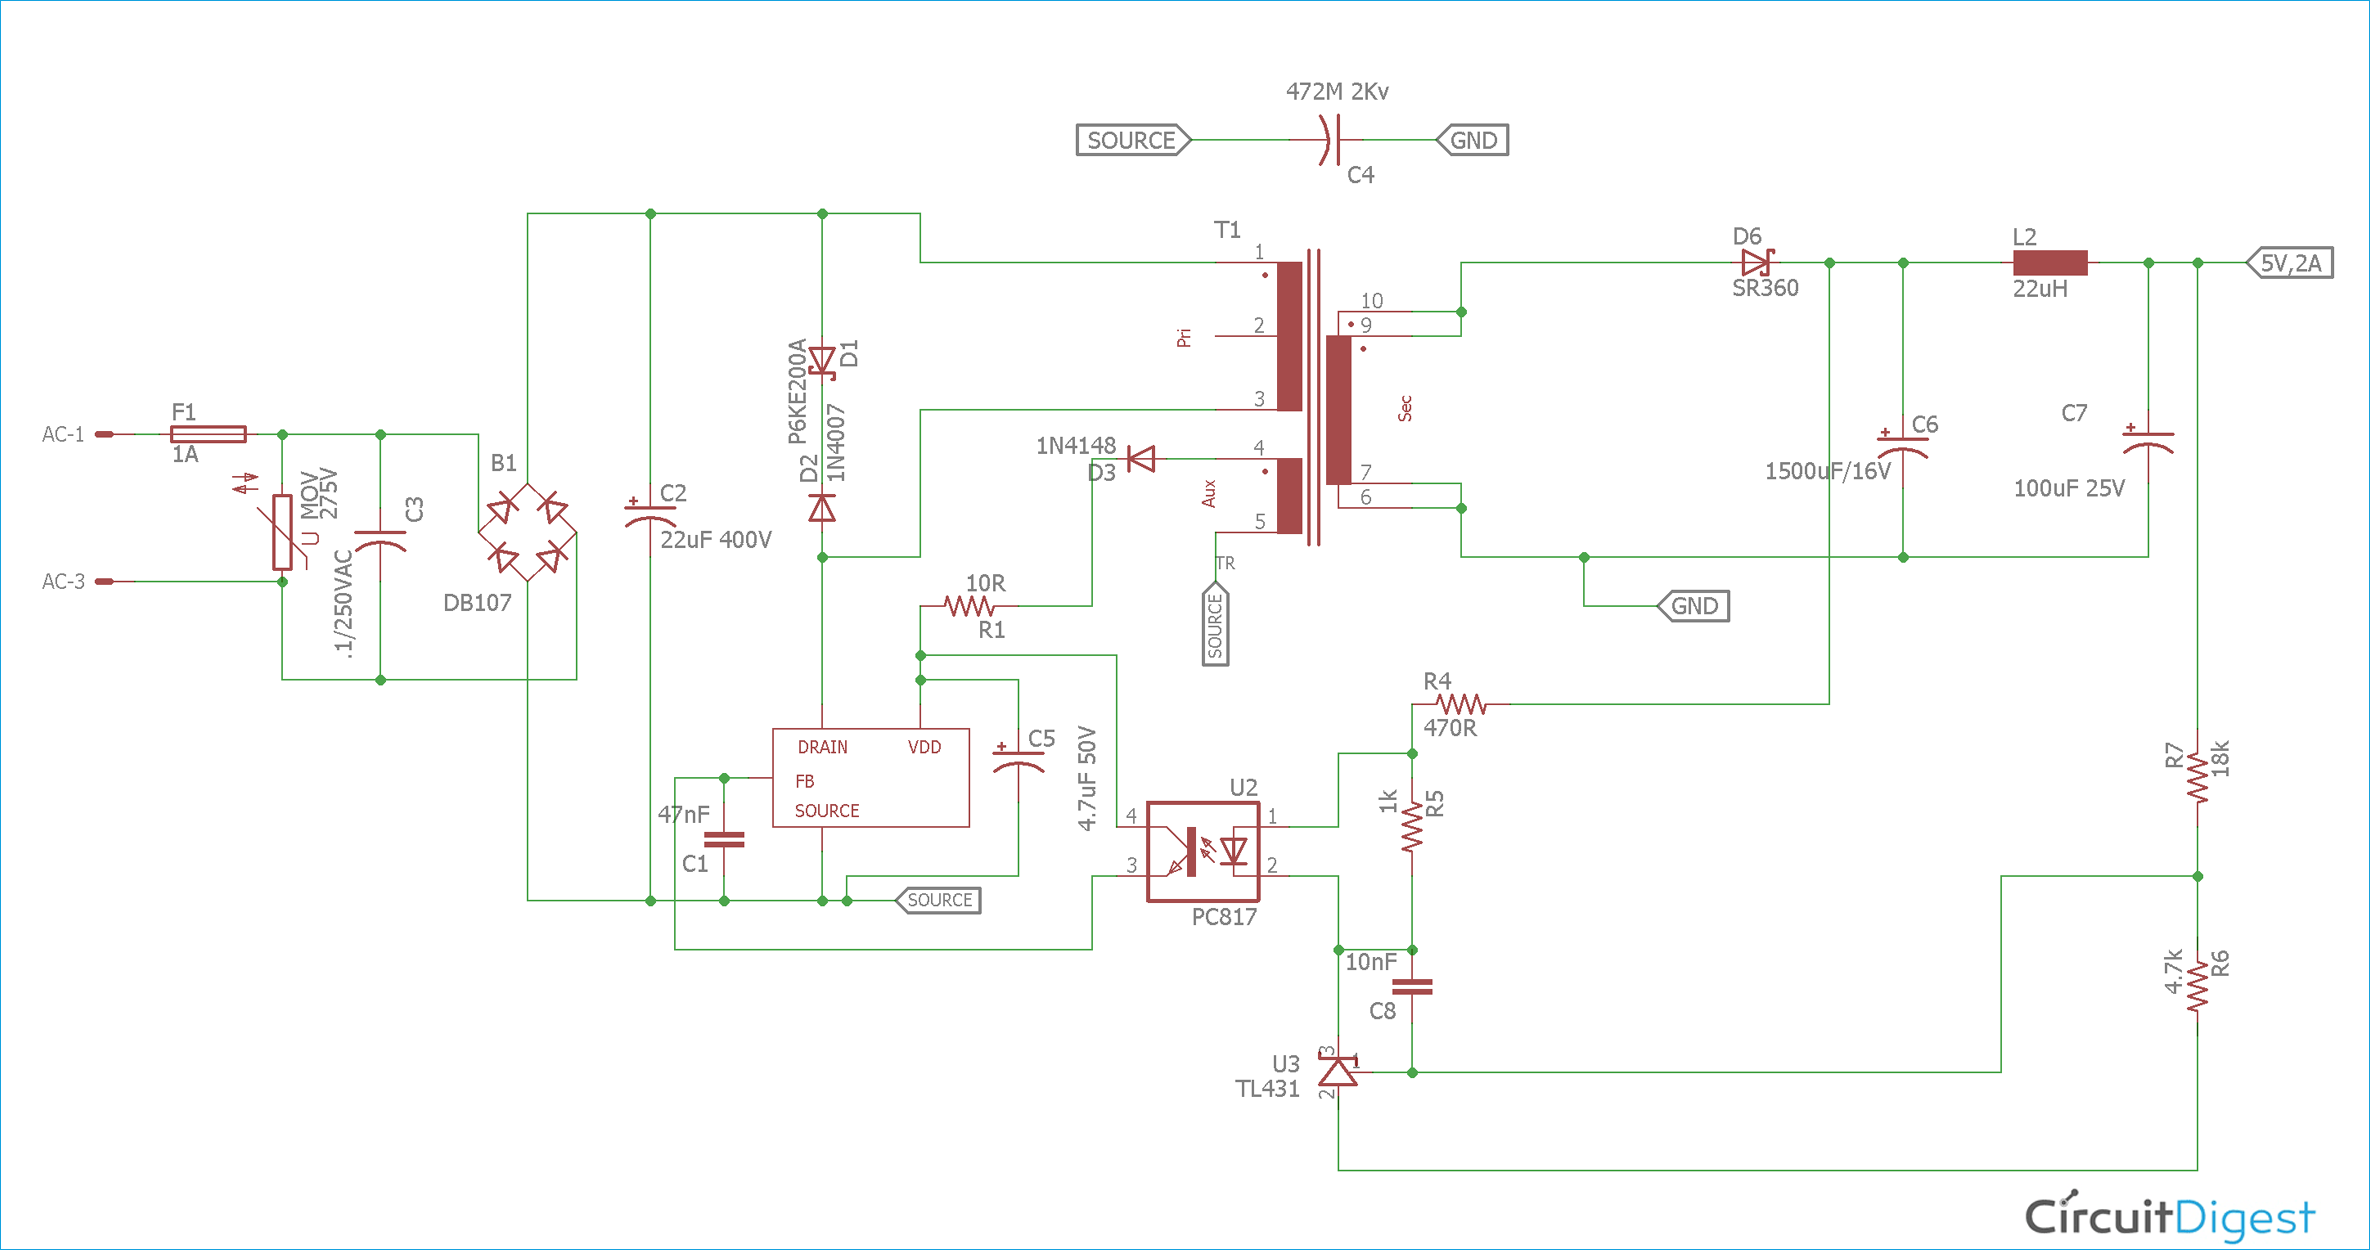 Circuit Diagram of 12V 1A Power Supply Circuit Design using VIPer22A